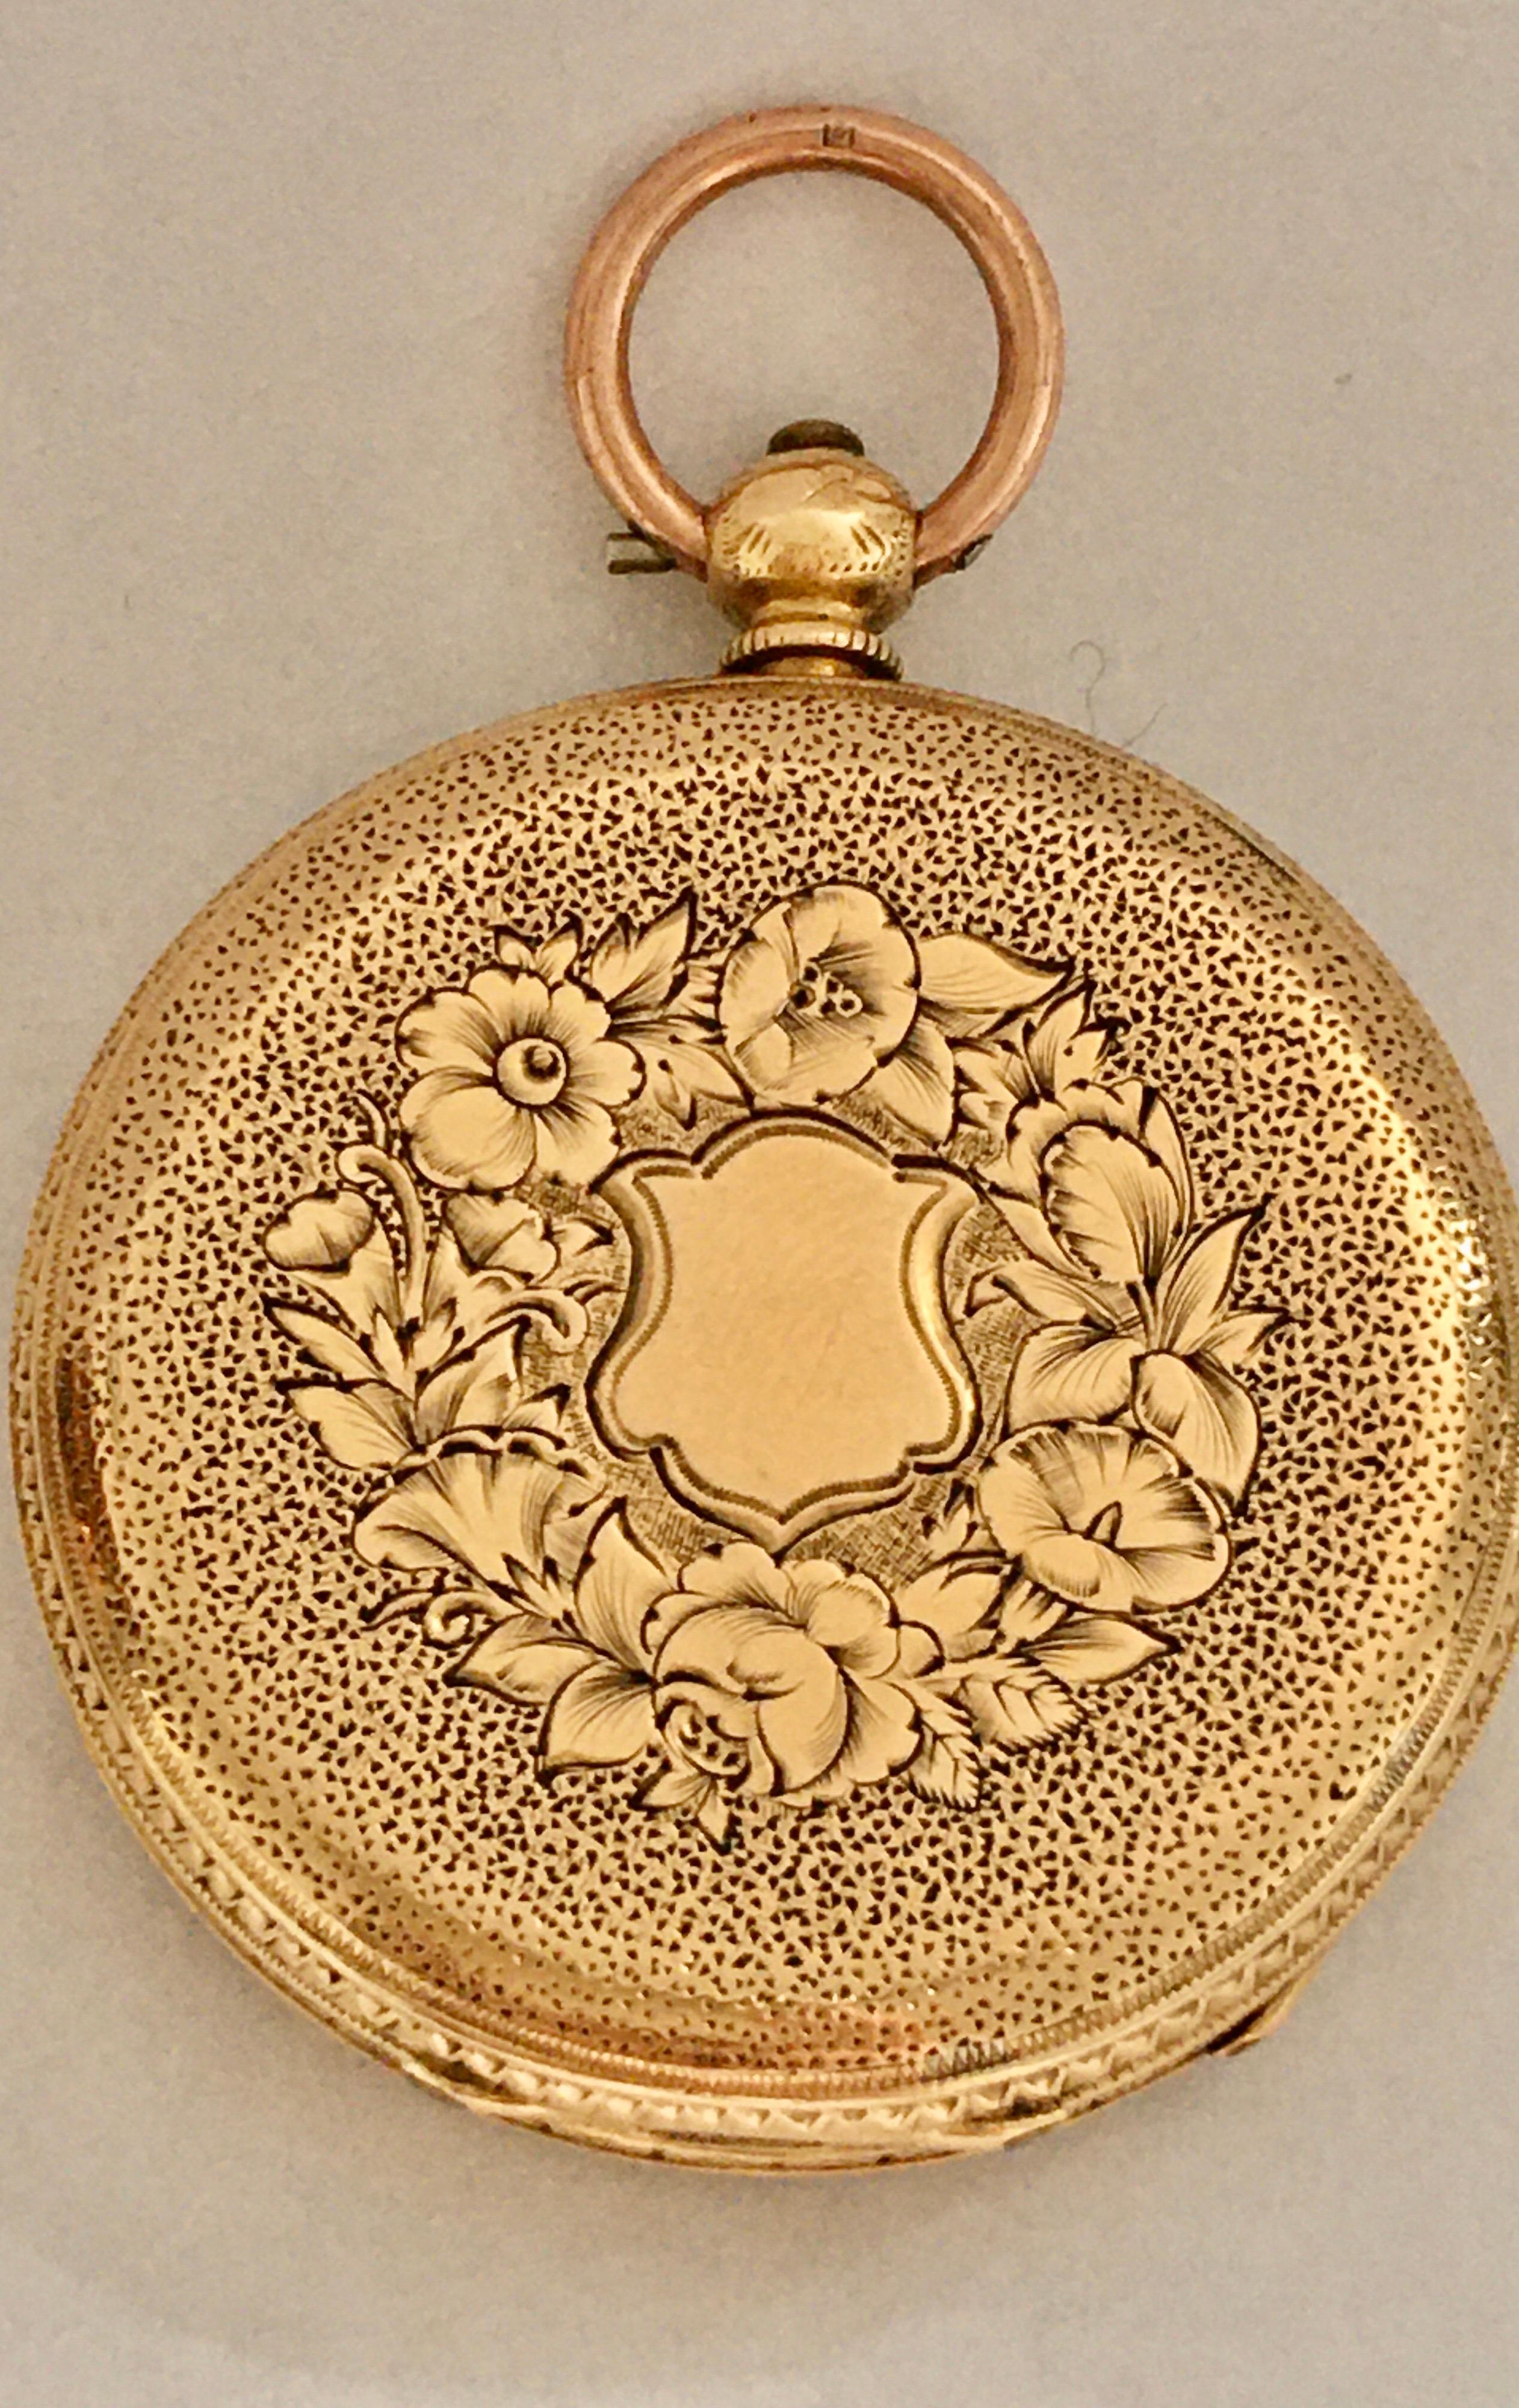 This beautiful antique key-wind gold pocket watch is working and it is ticking well. The metal ring or Loop is different colour to the watch case as shown. This watch is measured approximately 35mm diameter and weighed 31.4 grams.

Please study the